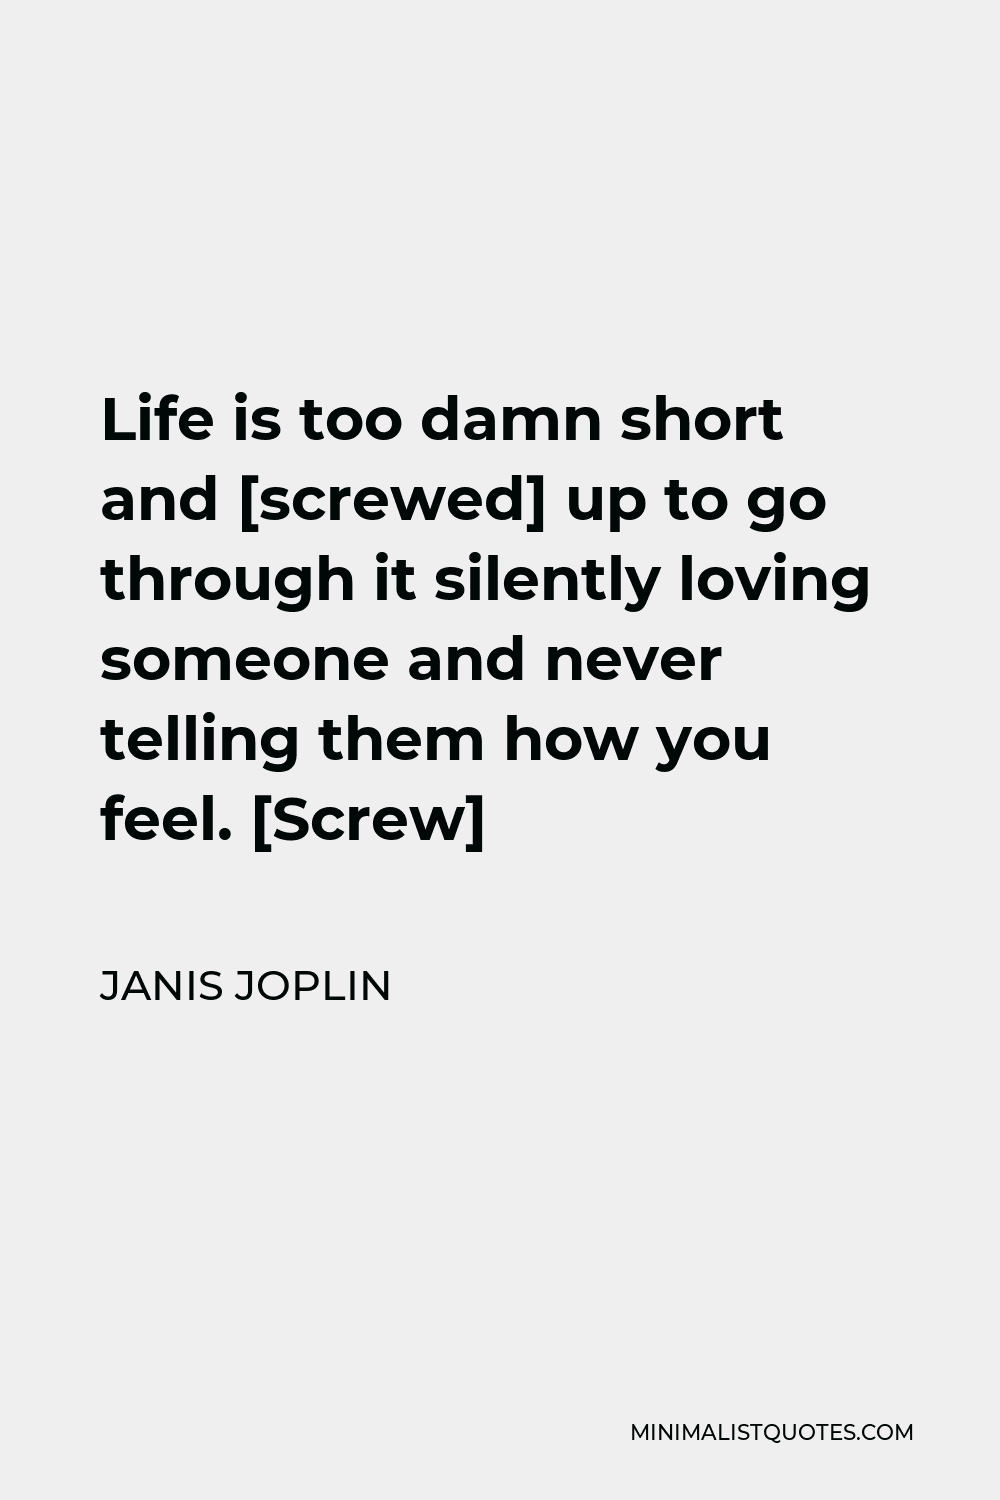 Janis Joplin Quote - Life is too damn short and [screwed] up to go through it silently loving someone and never telling them how you feel. [Screw]